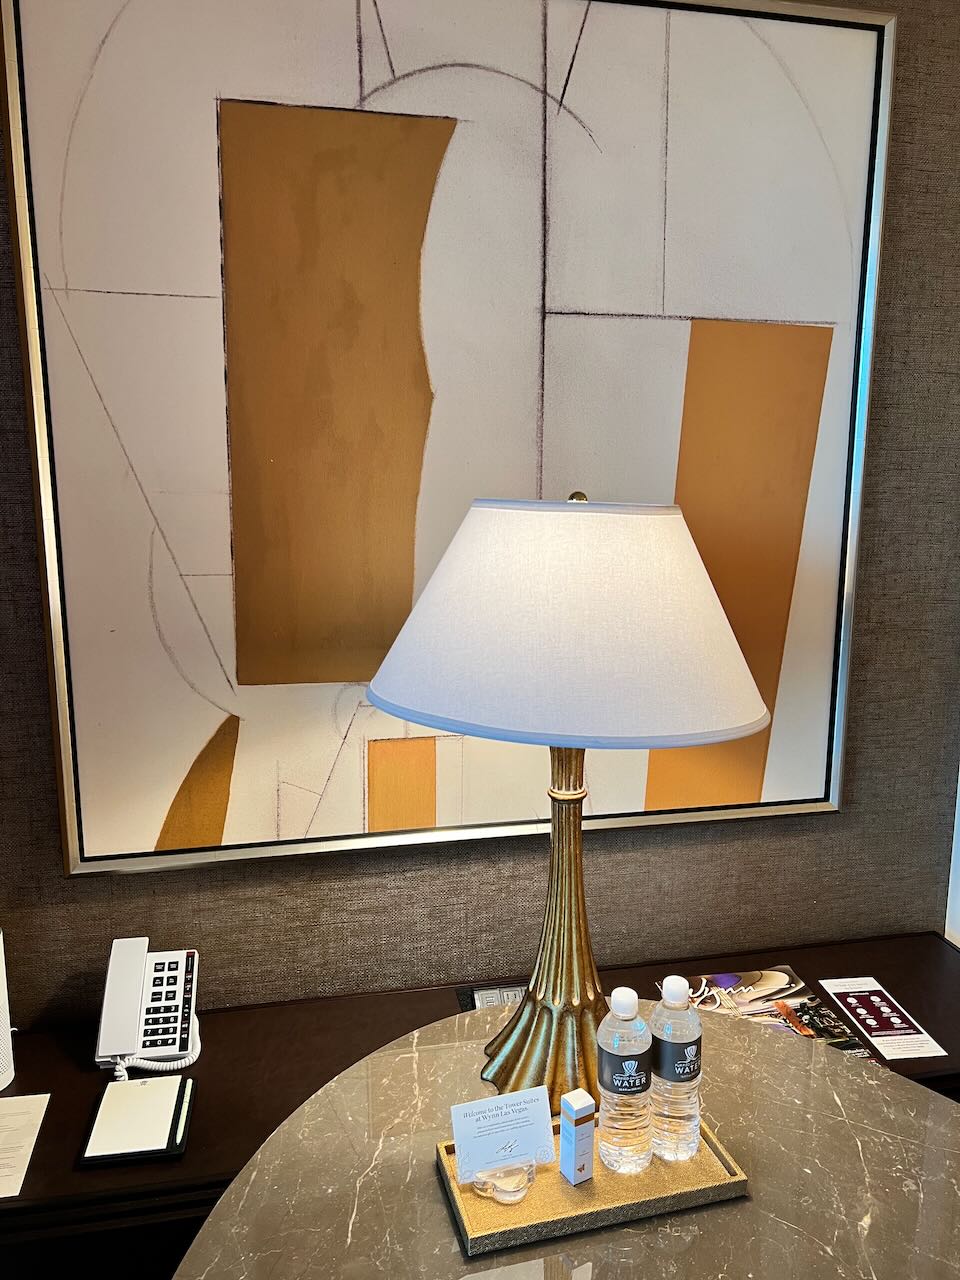 New Wynn Las Vegas Rooms - table and lamp